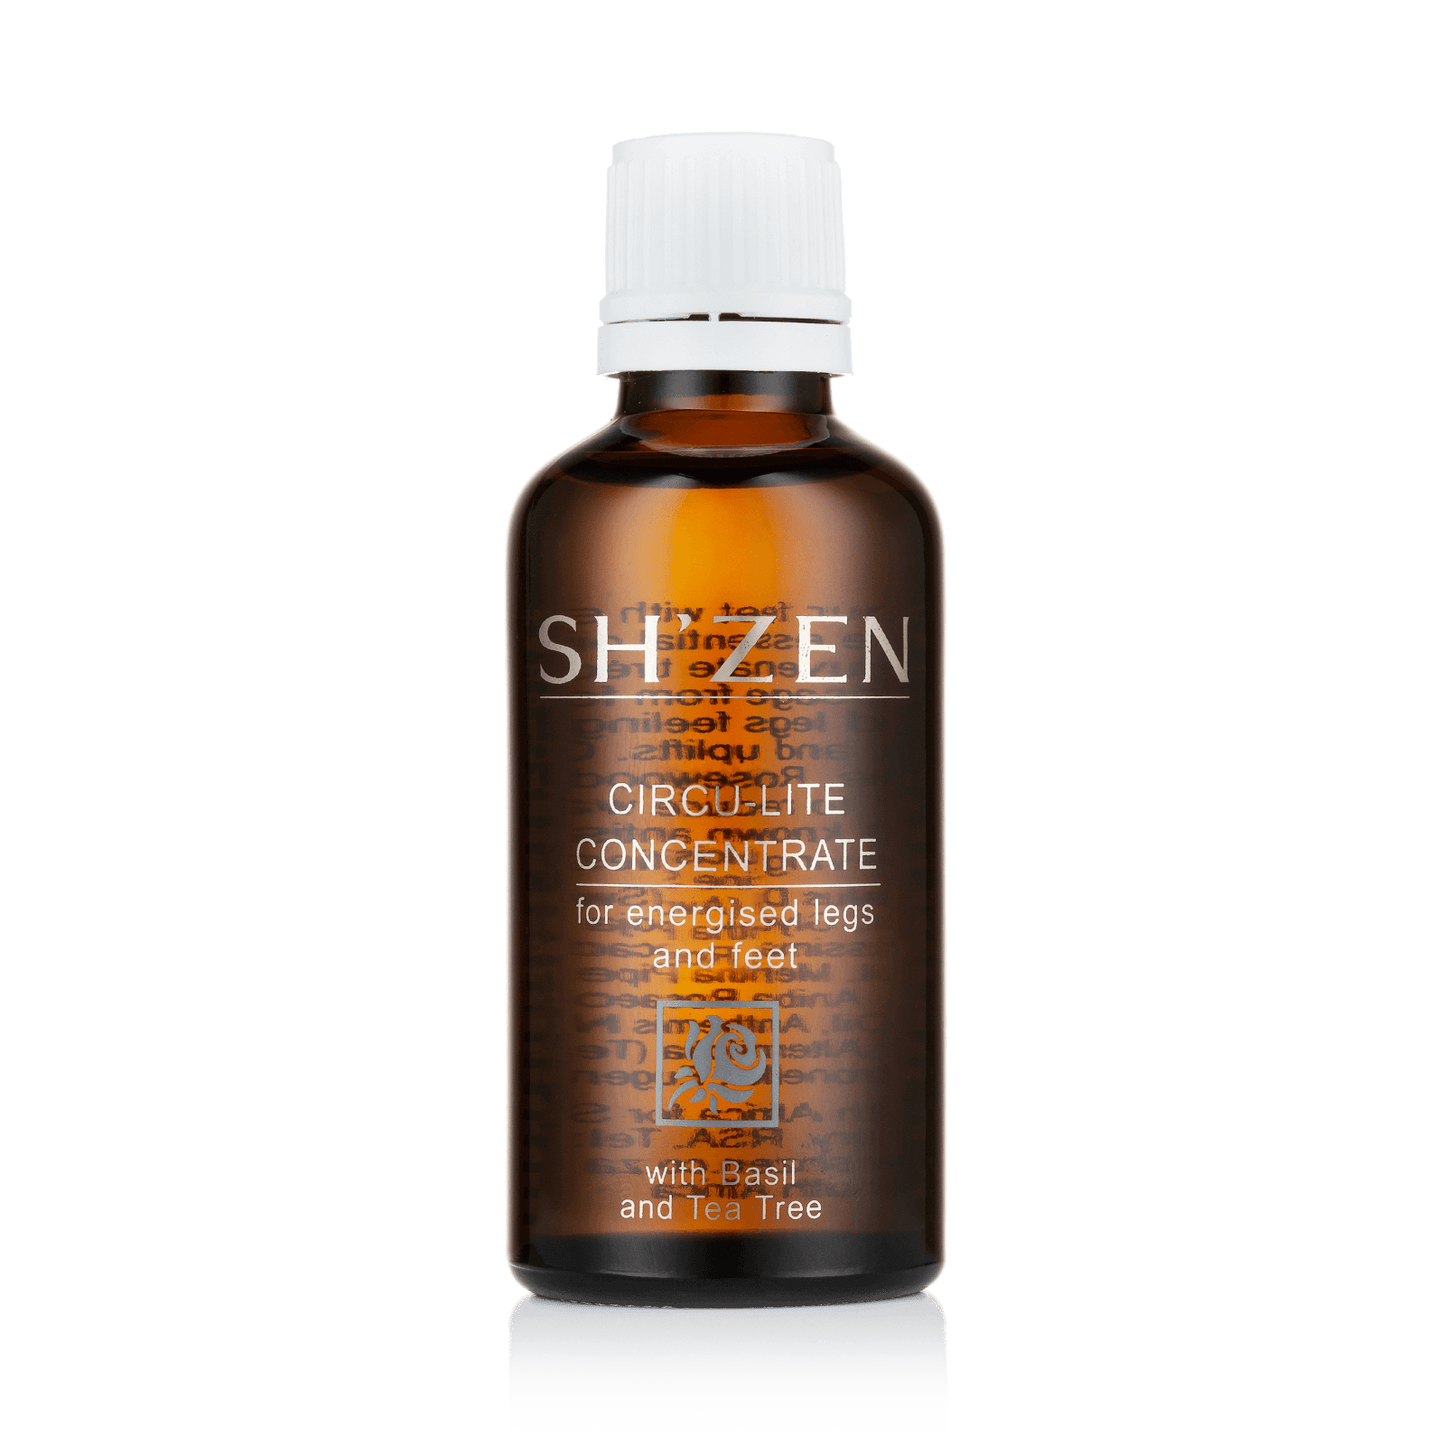 Sh'Zen - Circu-Lite Concentrate for energised legs and feet